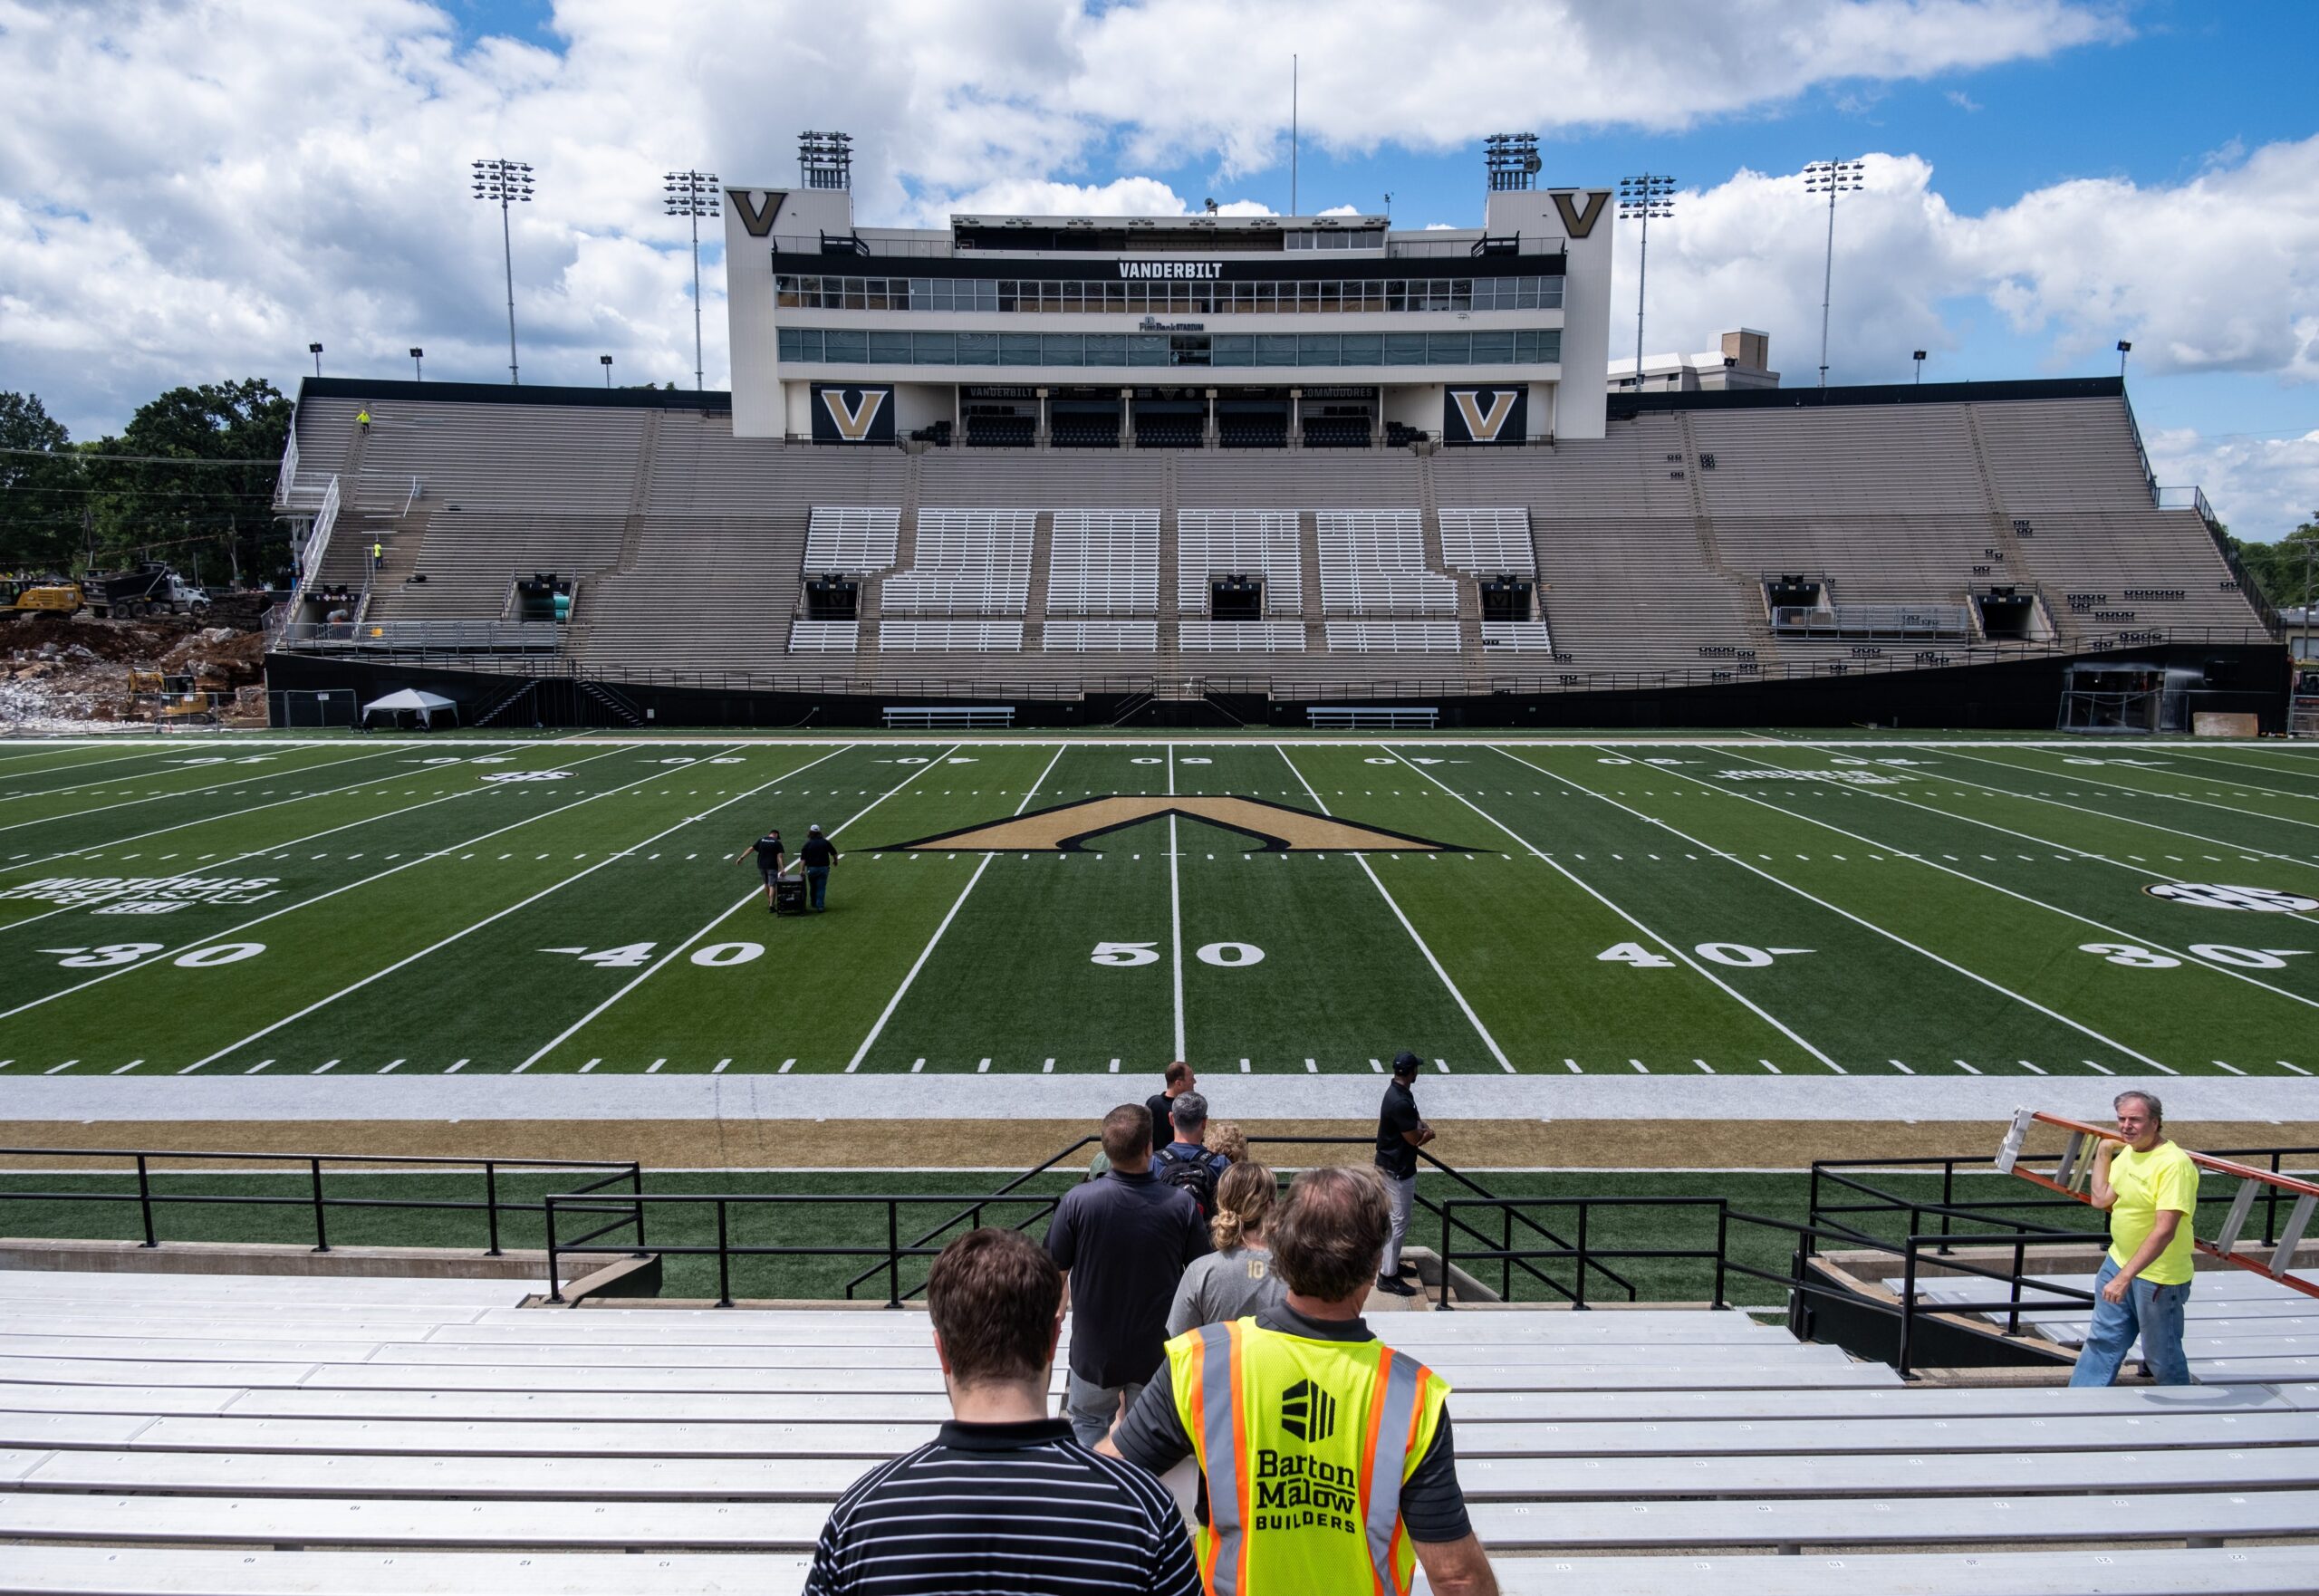 A view of FirstBank Stadium at Vanderbilt University on August 15,2023 as construction continues ahead of the football season.